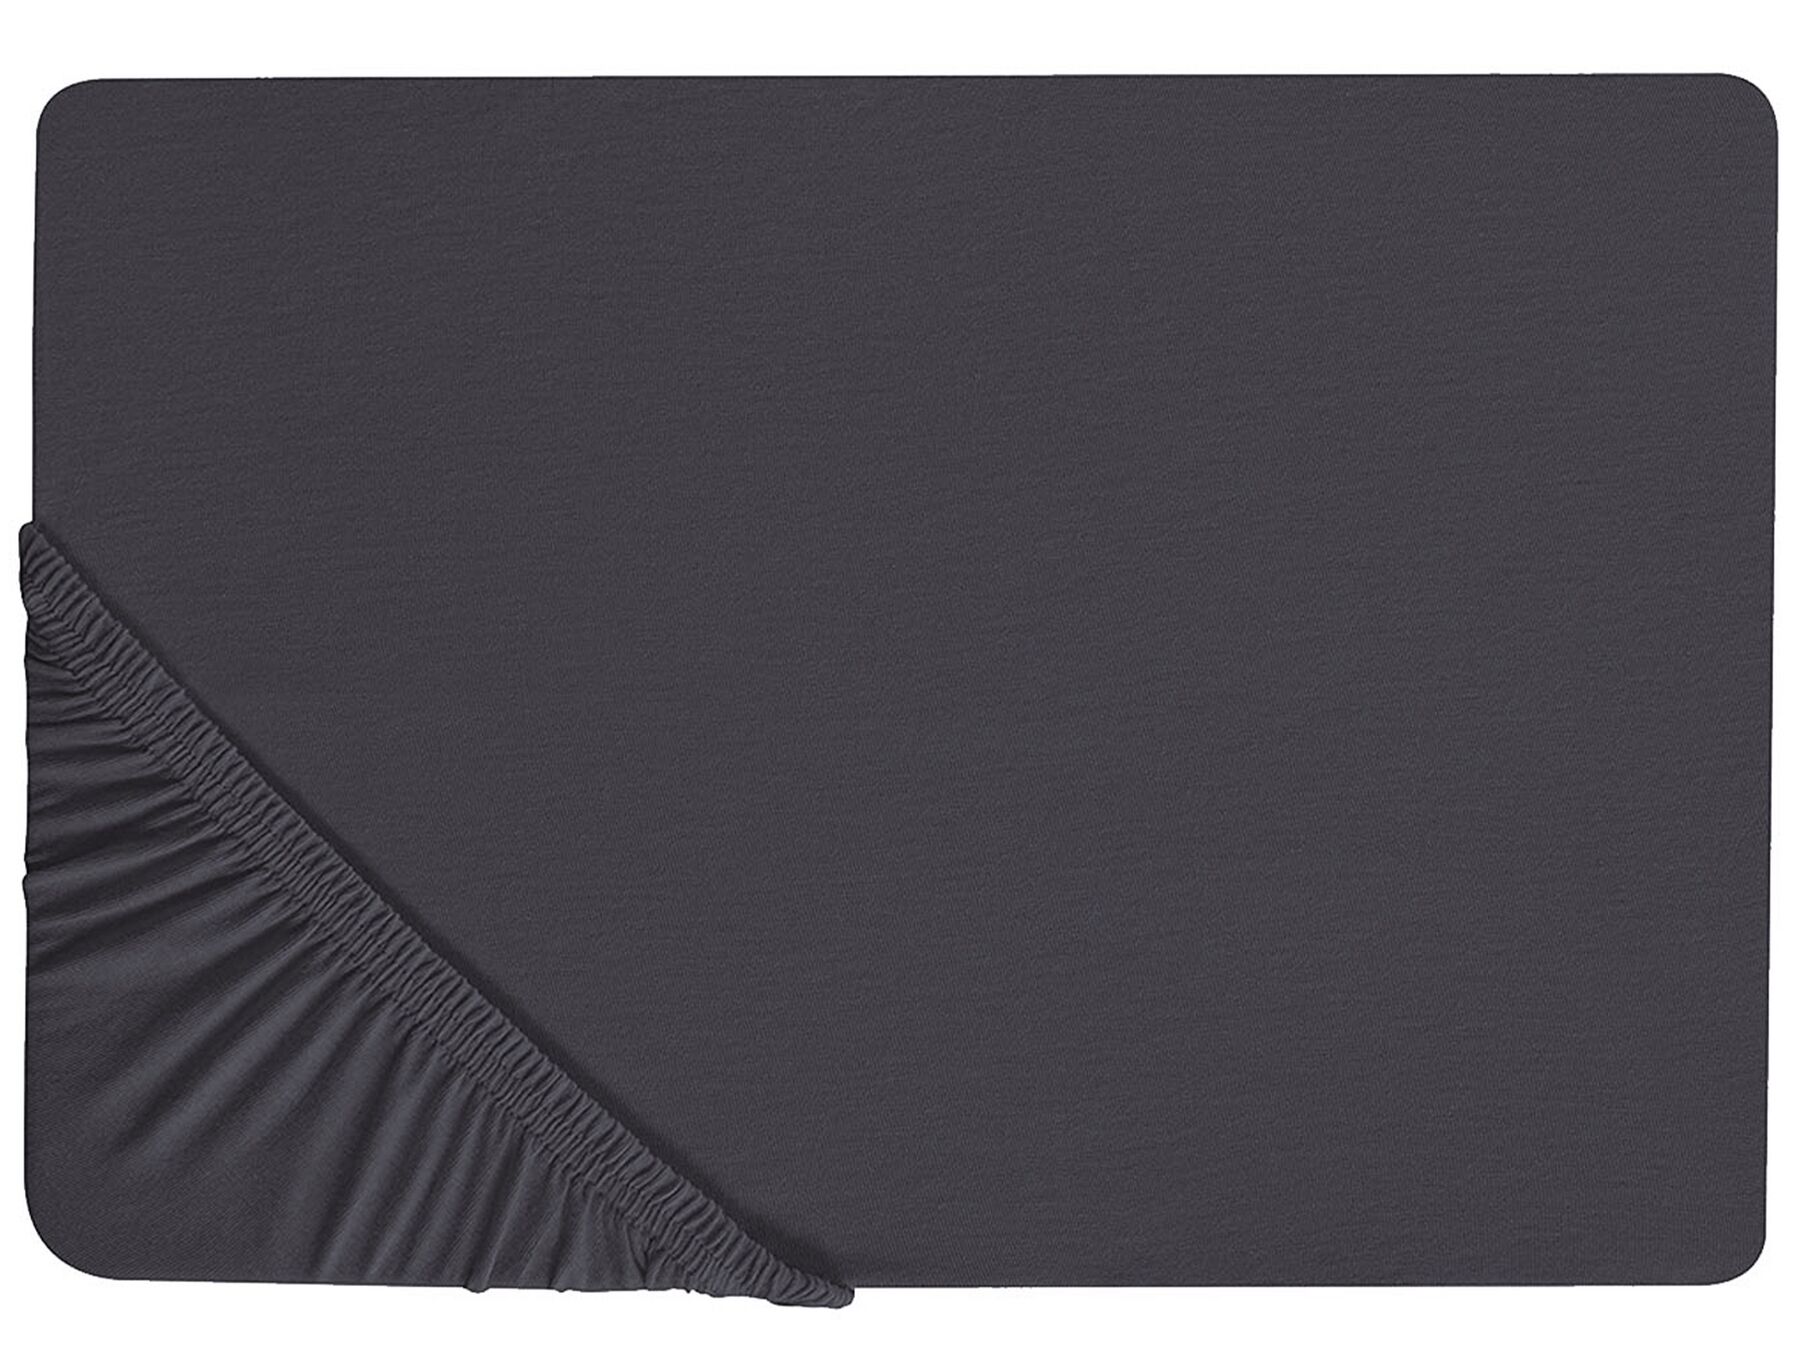 Cotton Fitted Sheet 160 x 200 cm Black HOFUF_815931